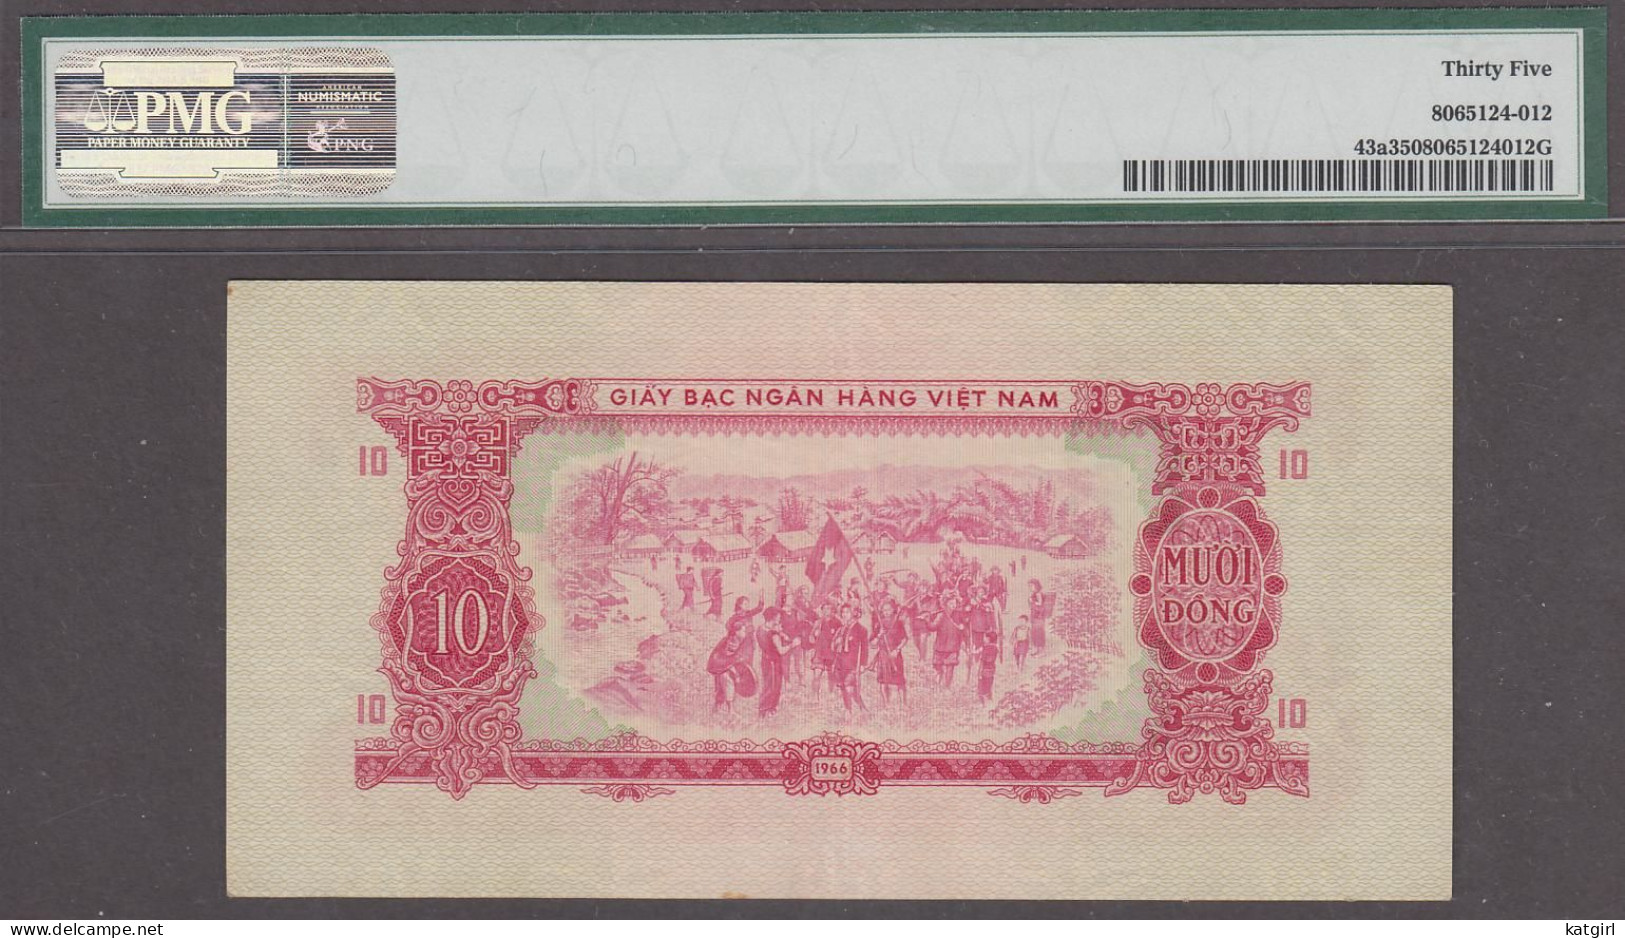 South Vietnam 10 Dong Banknote P-43a 1966(ND 1975) VF PMG 35 - Vietnam